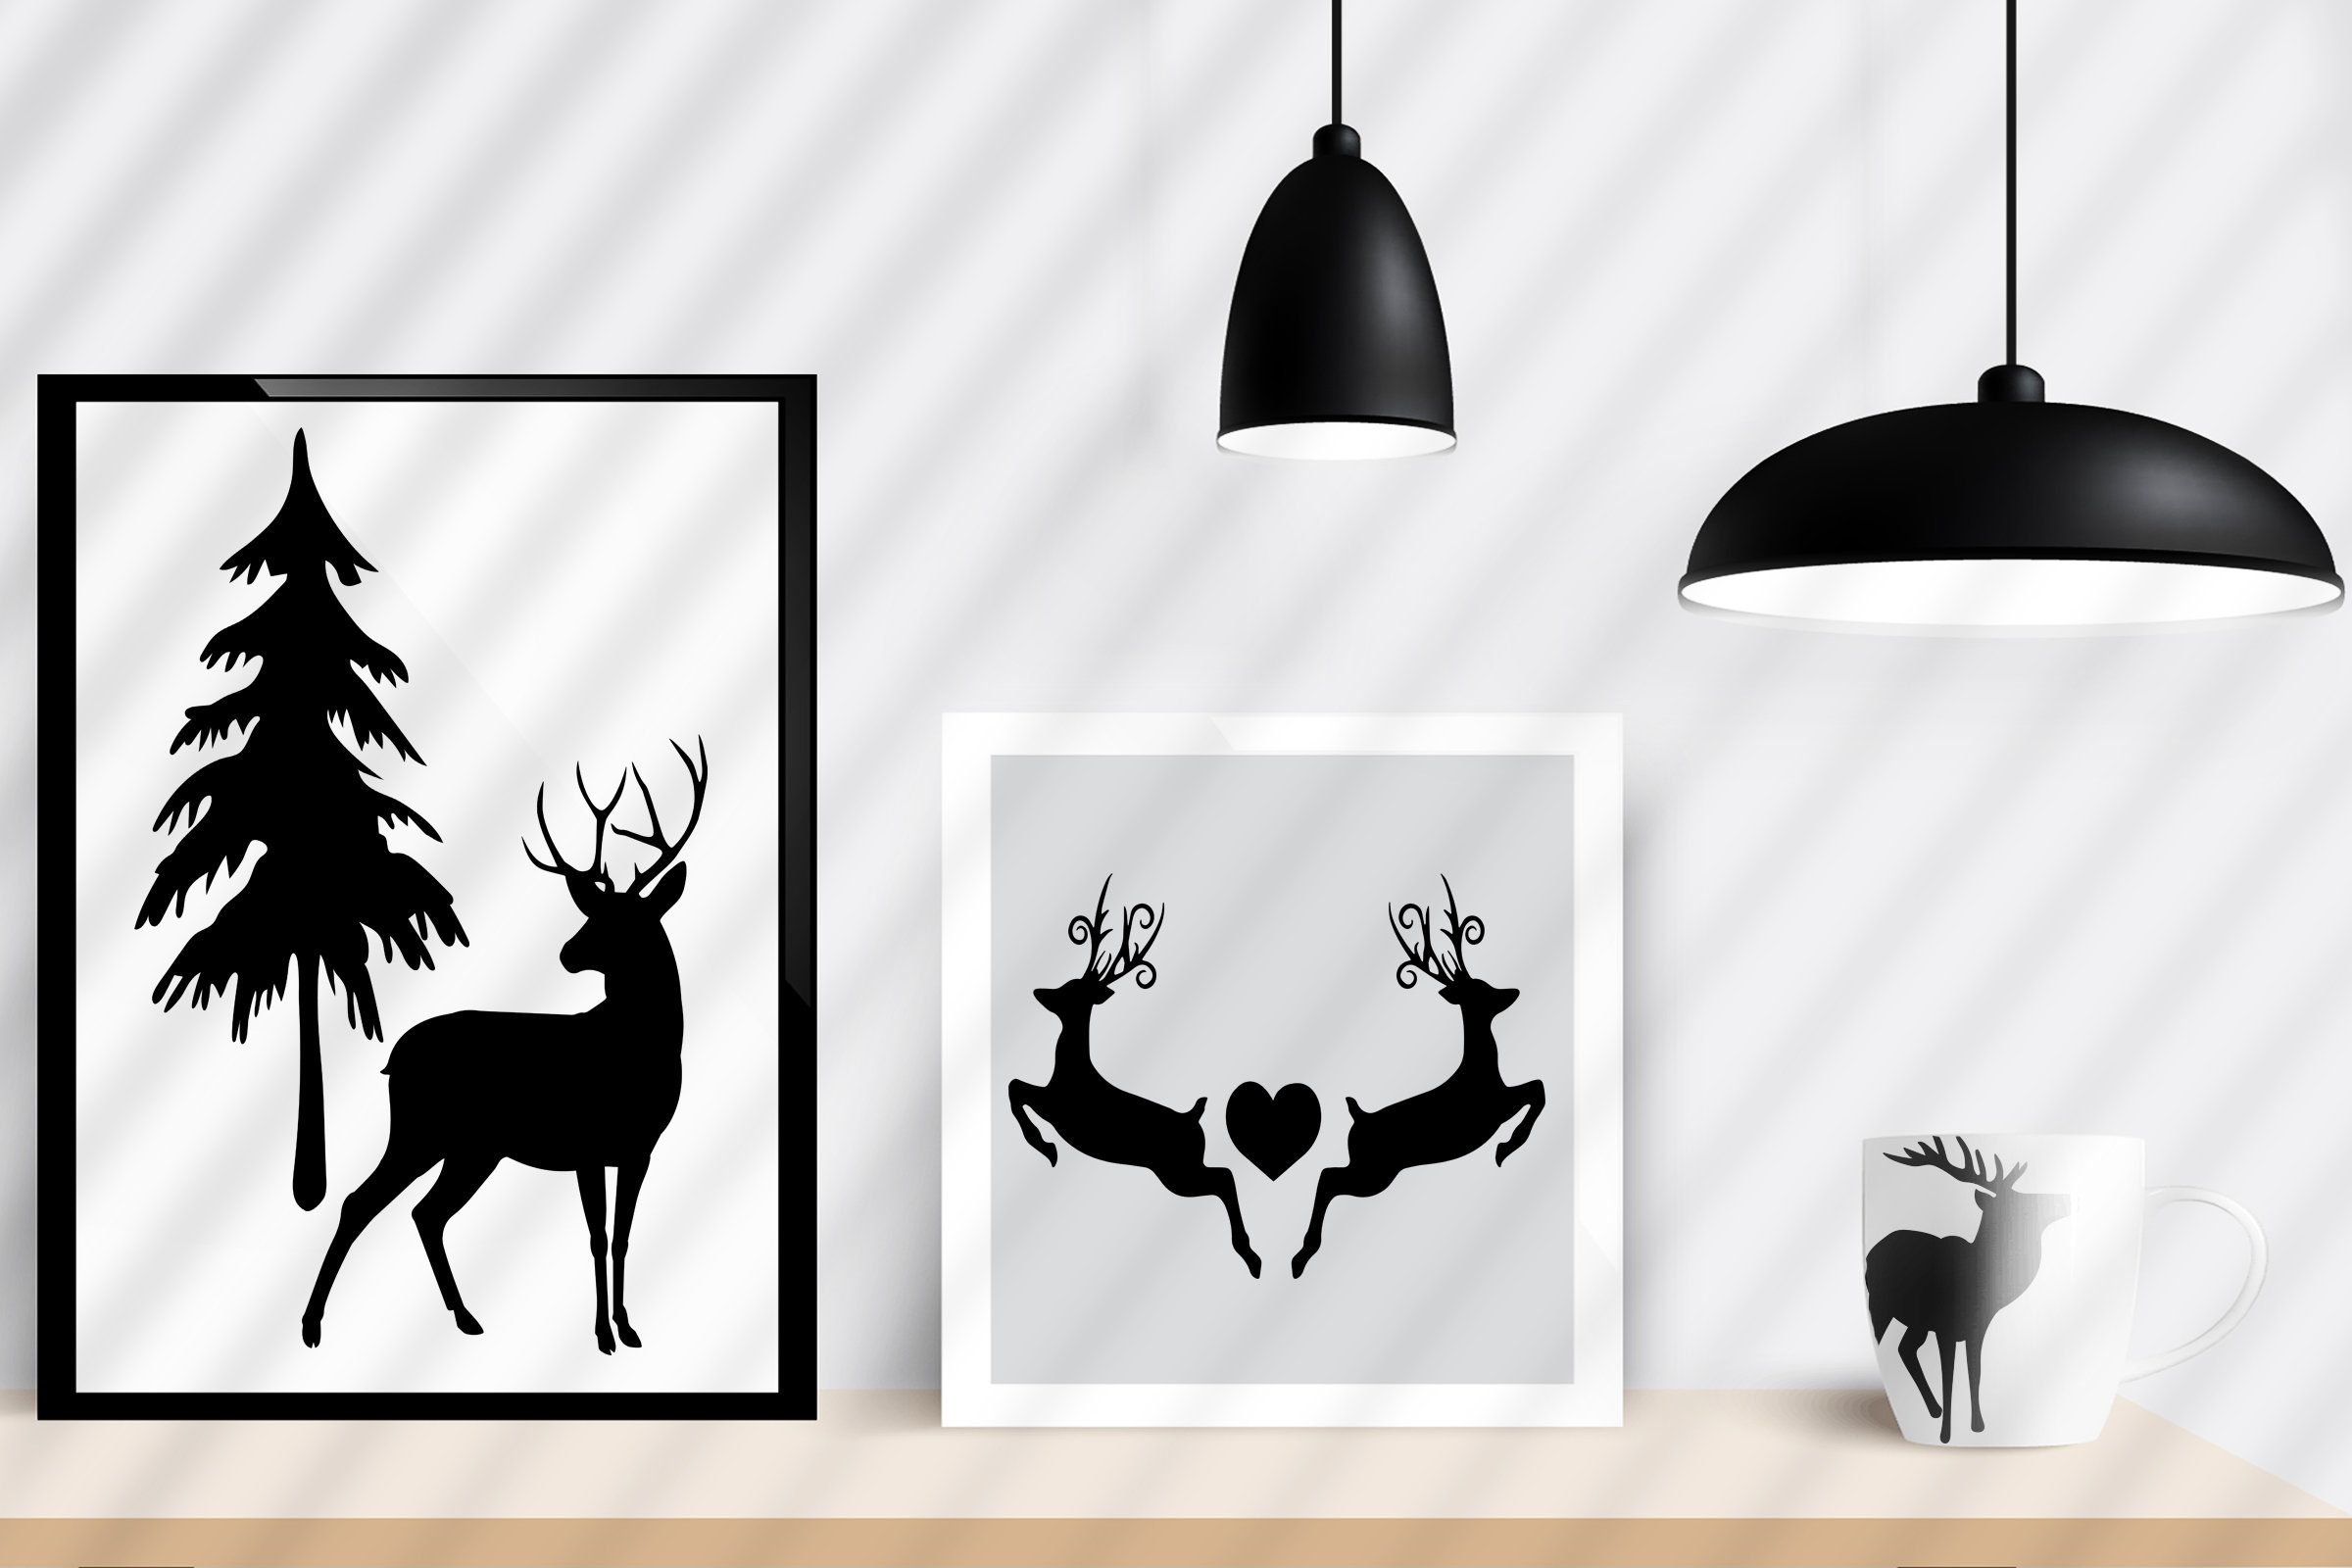 Use these moose for your posters.